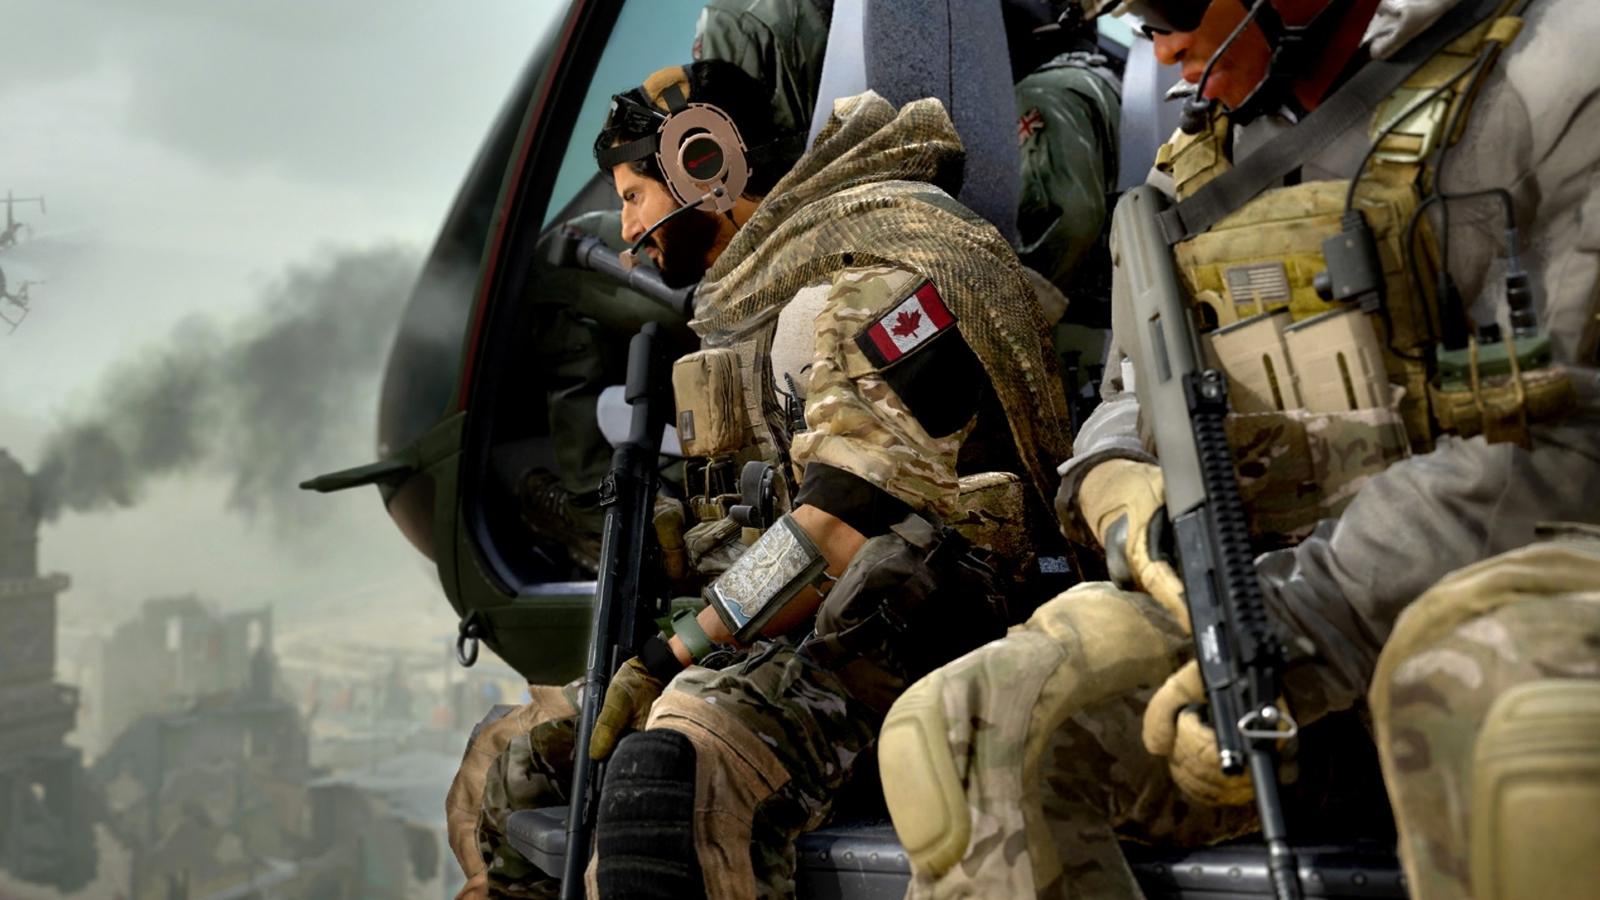 MW2 Ranked Play plans revealed with 2023 release confirmed